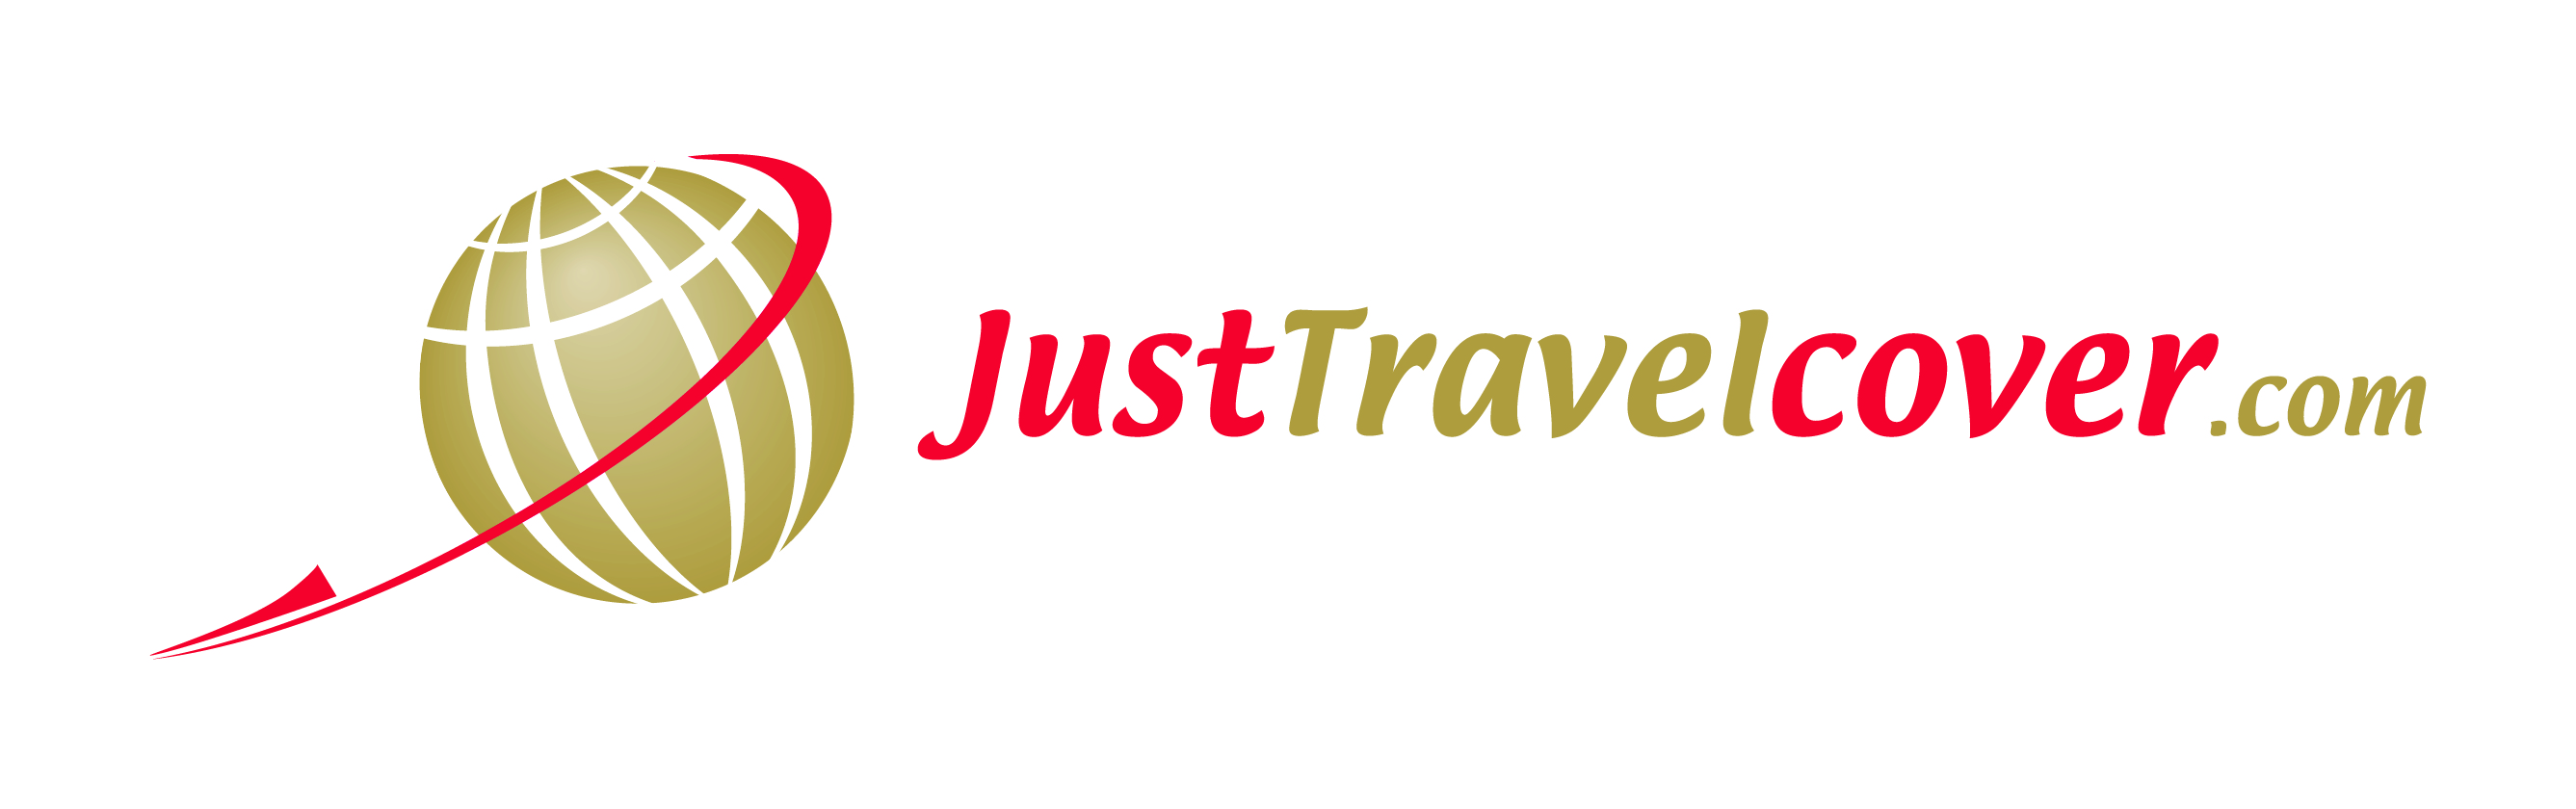 Just Travel Cover logo includes a gold globe and red plane encircling it